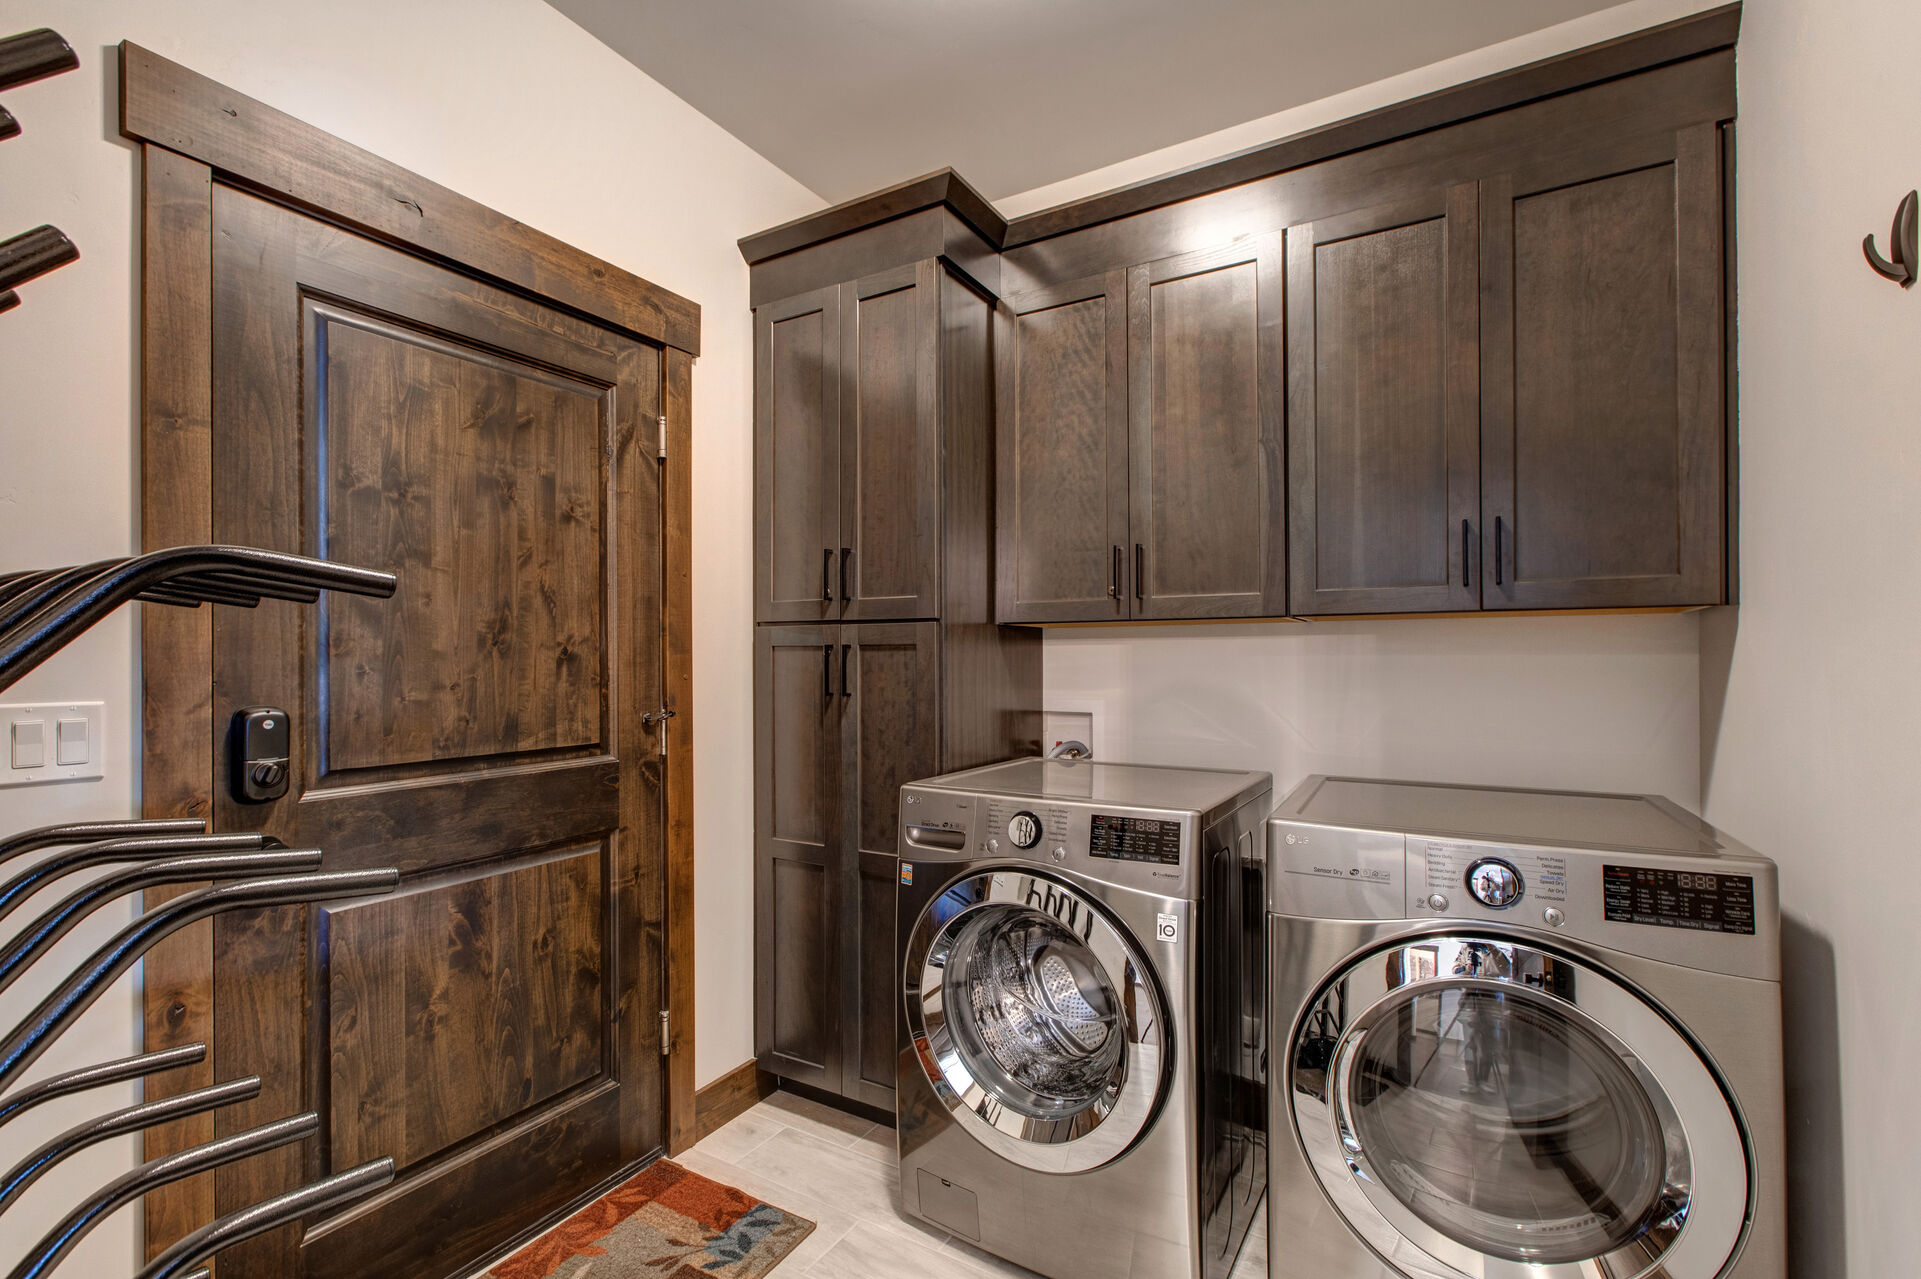 Large private laundry room off kitchen with brand new, full sized LG washer and dryer units, as well as key-padded entrance from the homes' private garage, outfitted with a ski/snowboard boot drying rack